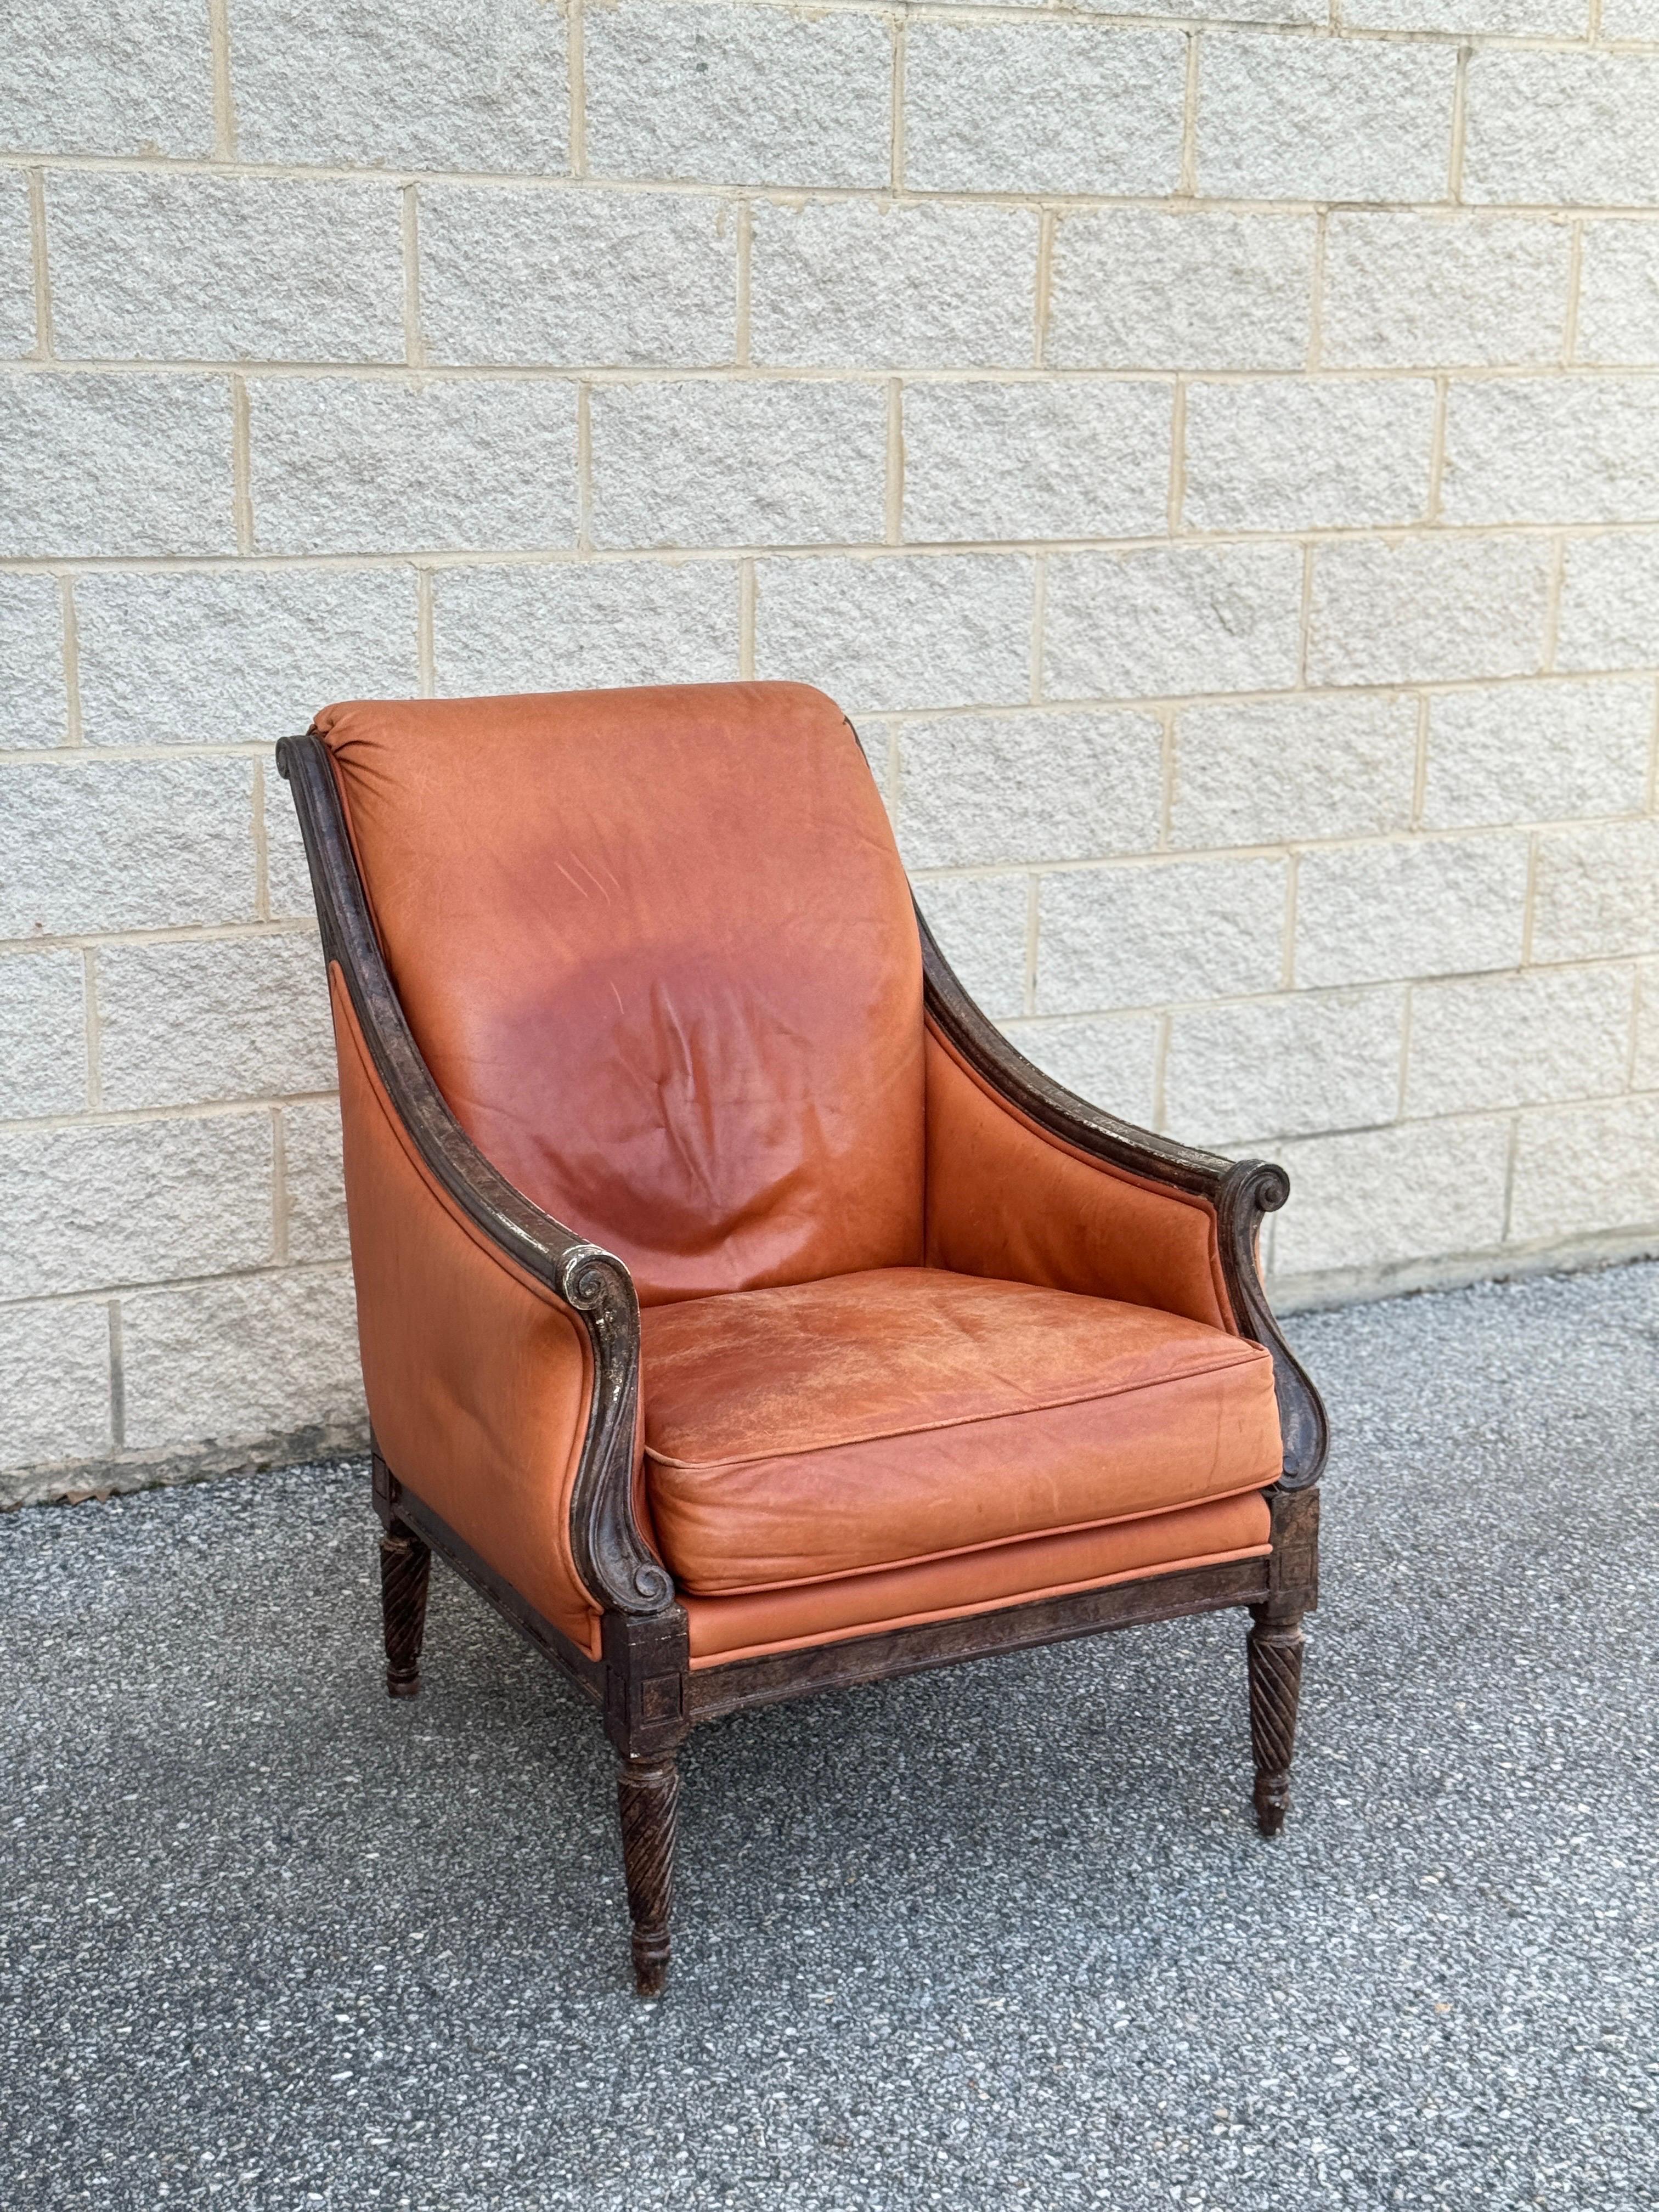 This Vintage French Leather Library Club Chair epitomizes the George IV style with its caramel-colored fine leather upholstery. A timeless piece, perfect for adding character to any library or living space.